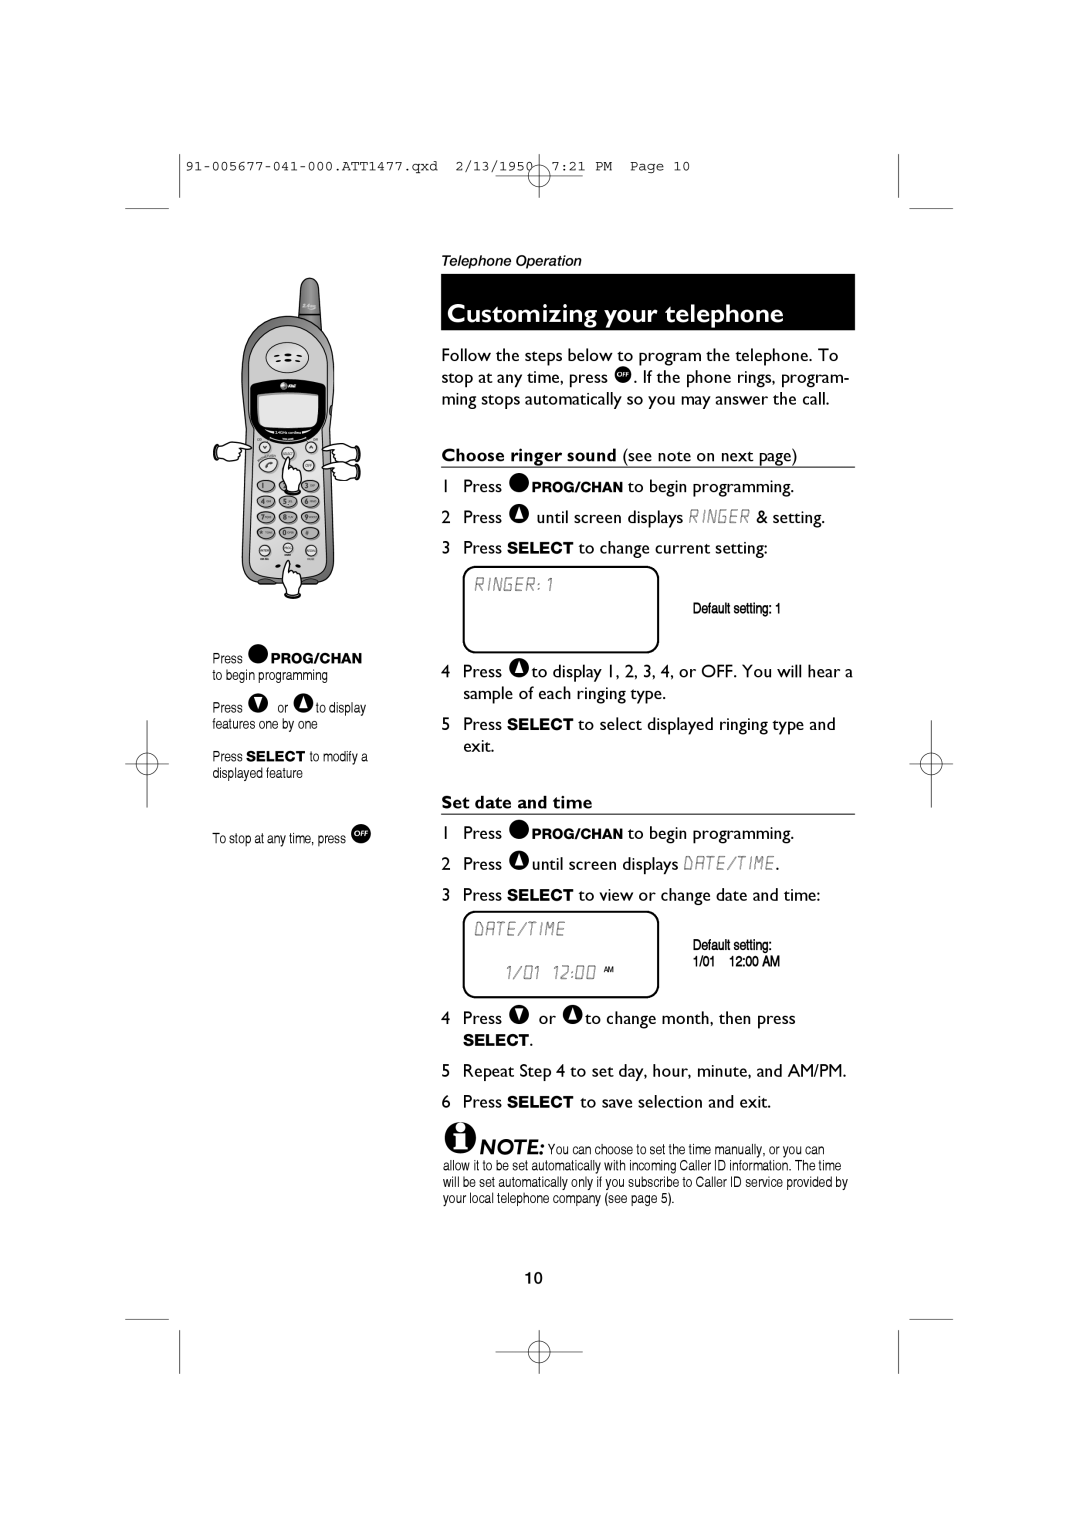 AT&T 1177 user manual Customizing your telephone, Ringer, DATE/TIME 1/01 1200 AM 